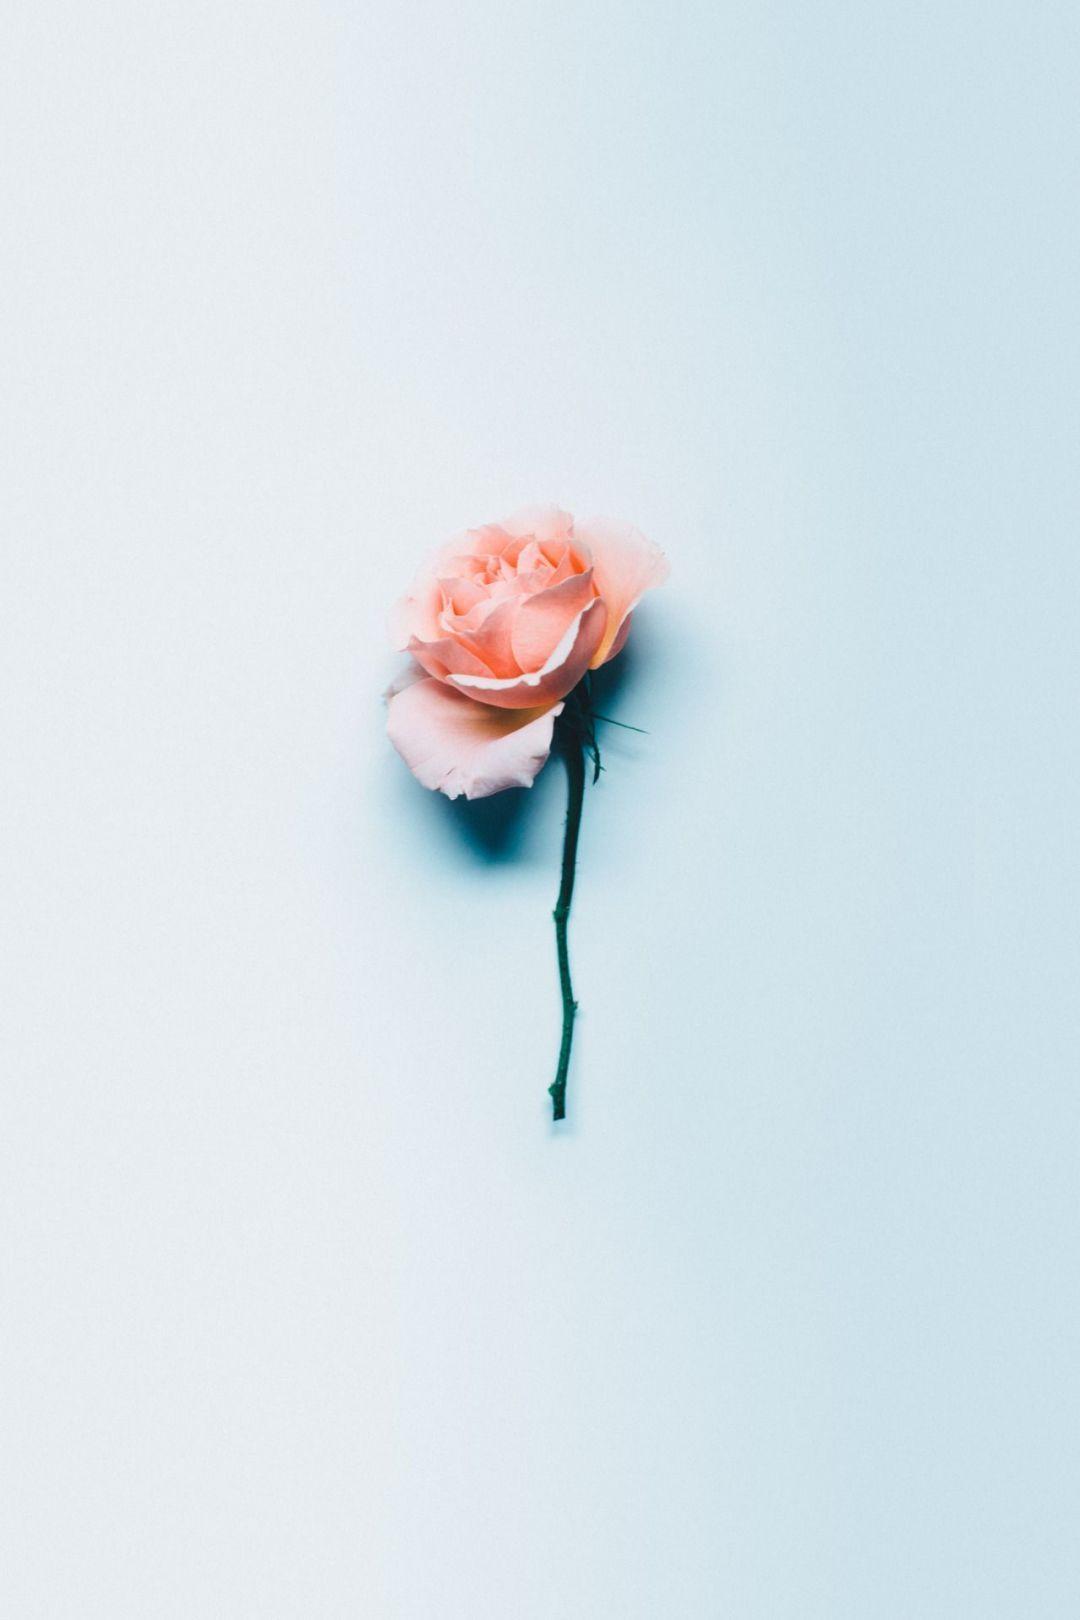 1080x1620 Aesthetic Rose - Android, iPhone, Desktop HD Background